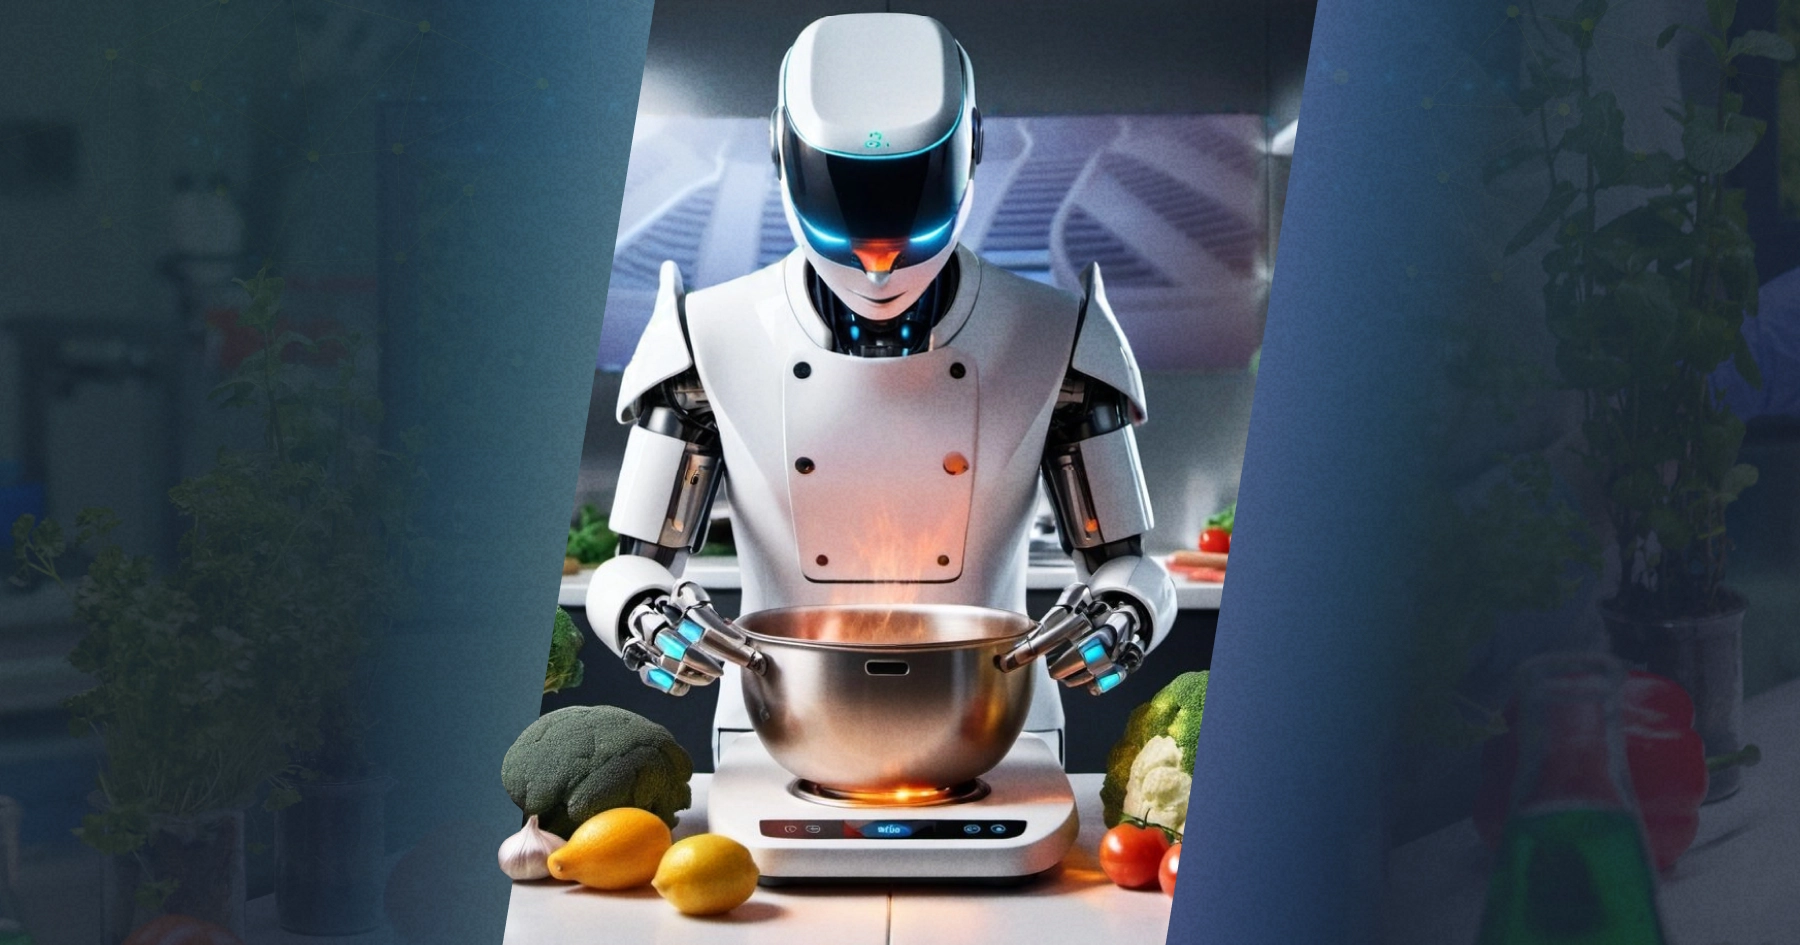 AI Cooking Assistants: the Upcoming World of the Algorithmic Recipes